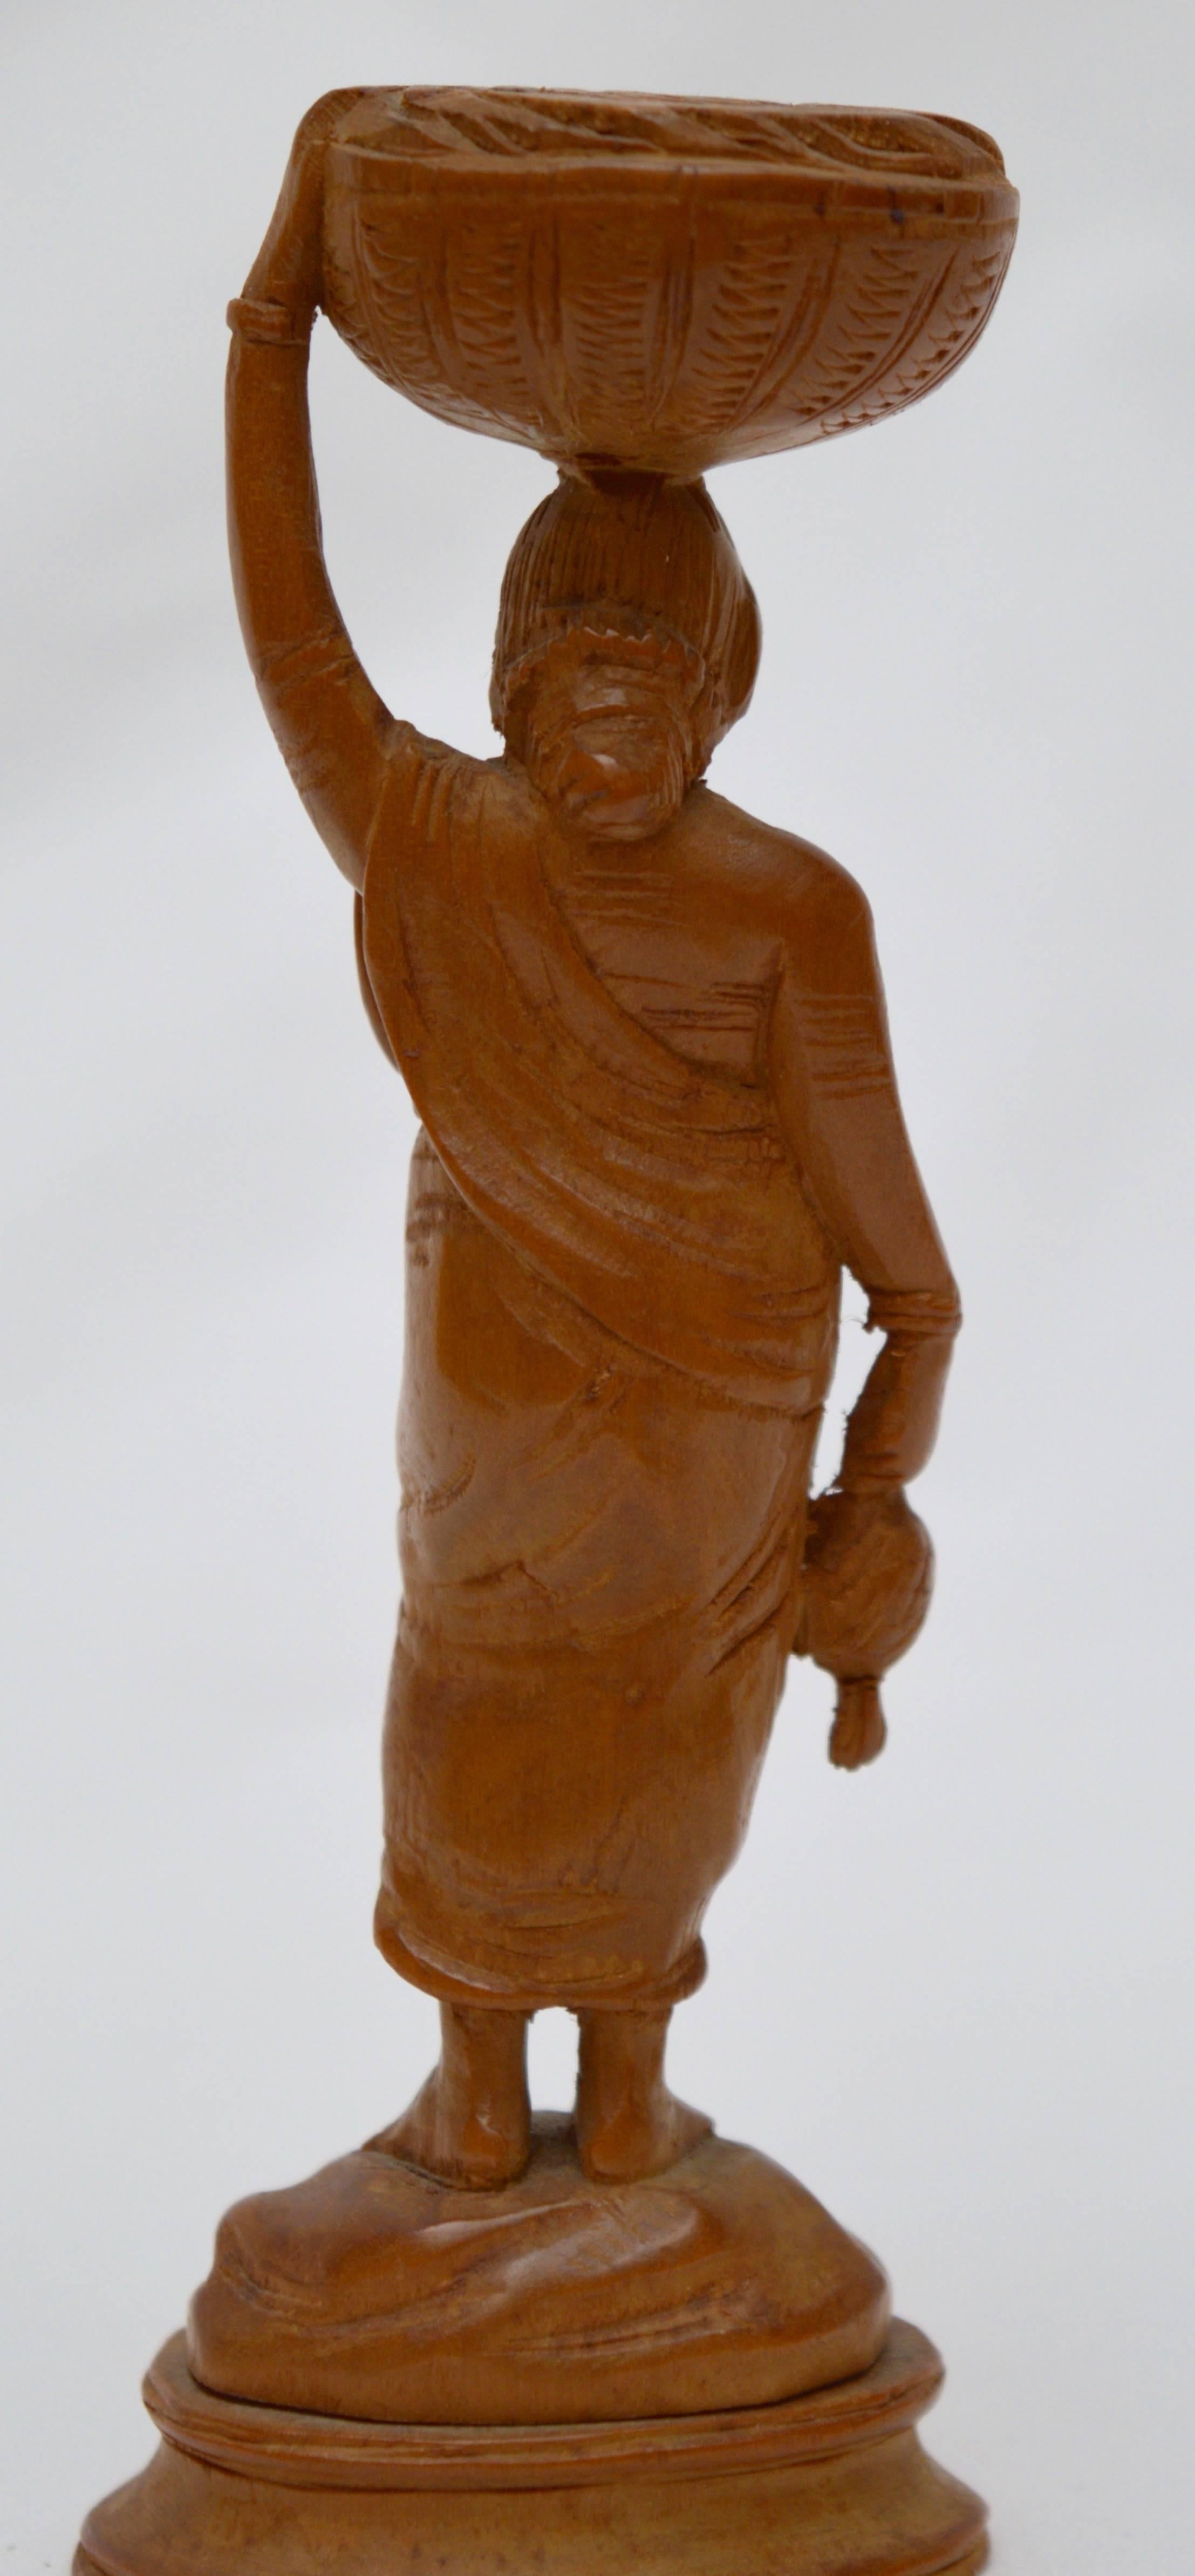 Early 19th century Southern Italian figure carved from fruitwood. Completely original and in excellent condition.